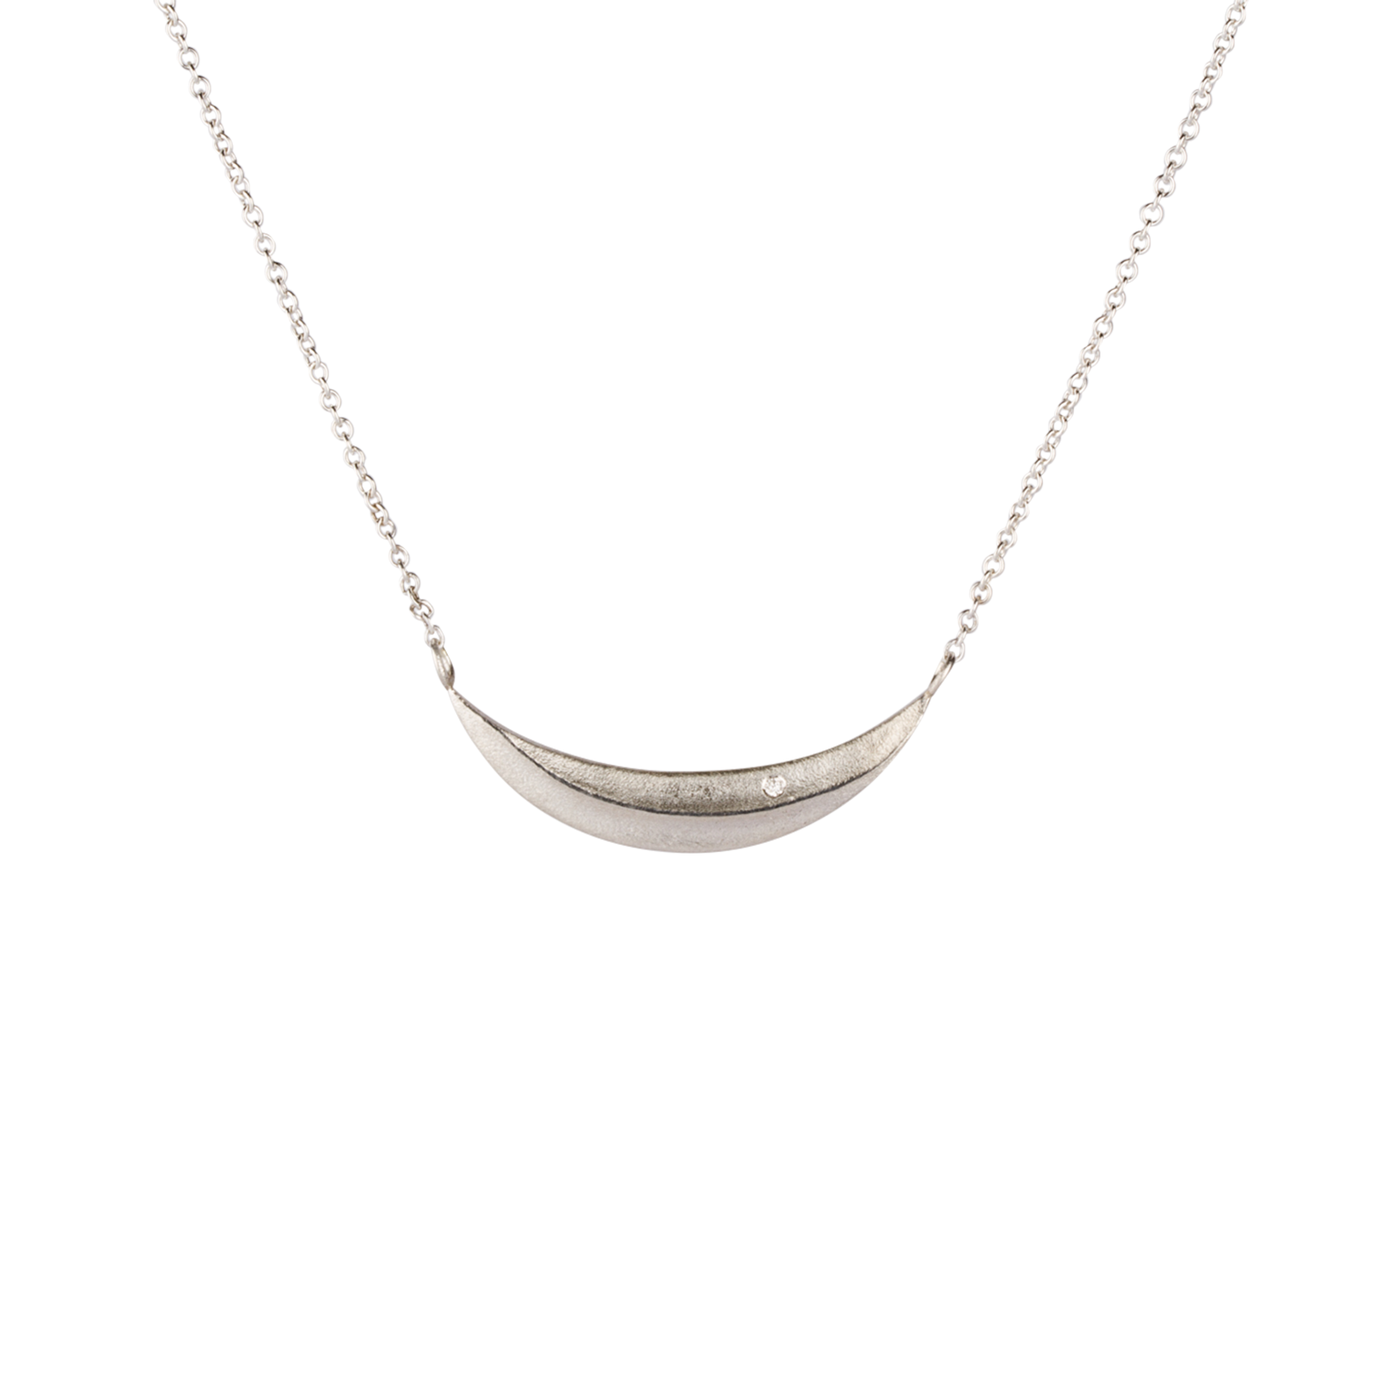 Sterling Silver and Diamond Wisp Necklace by Corey Egan on a white background